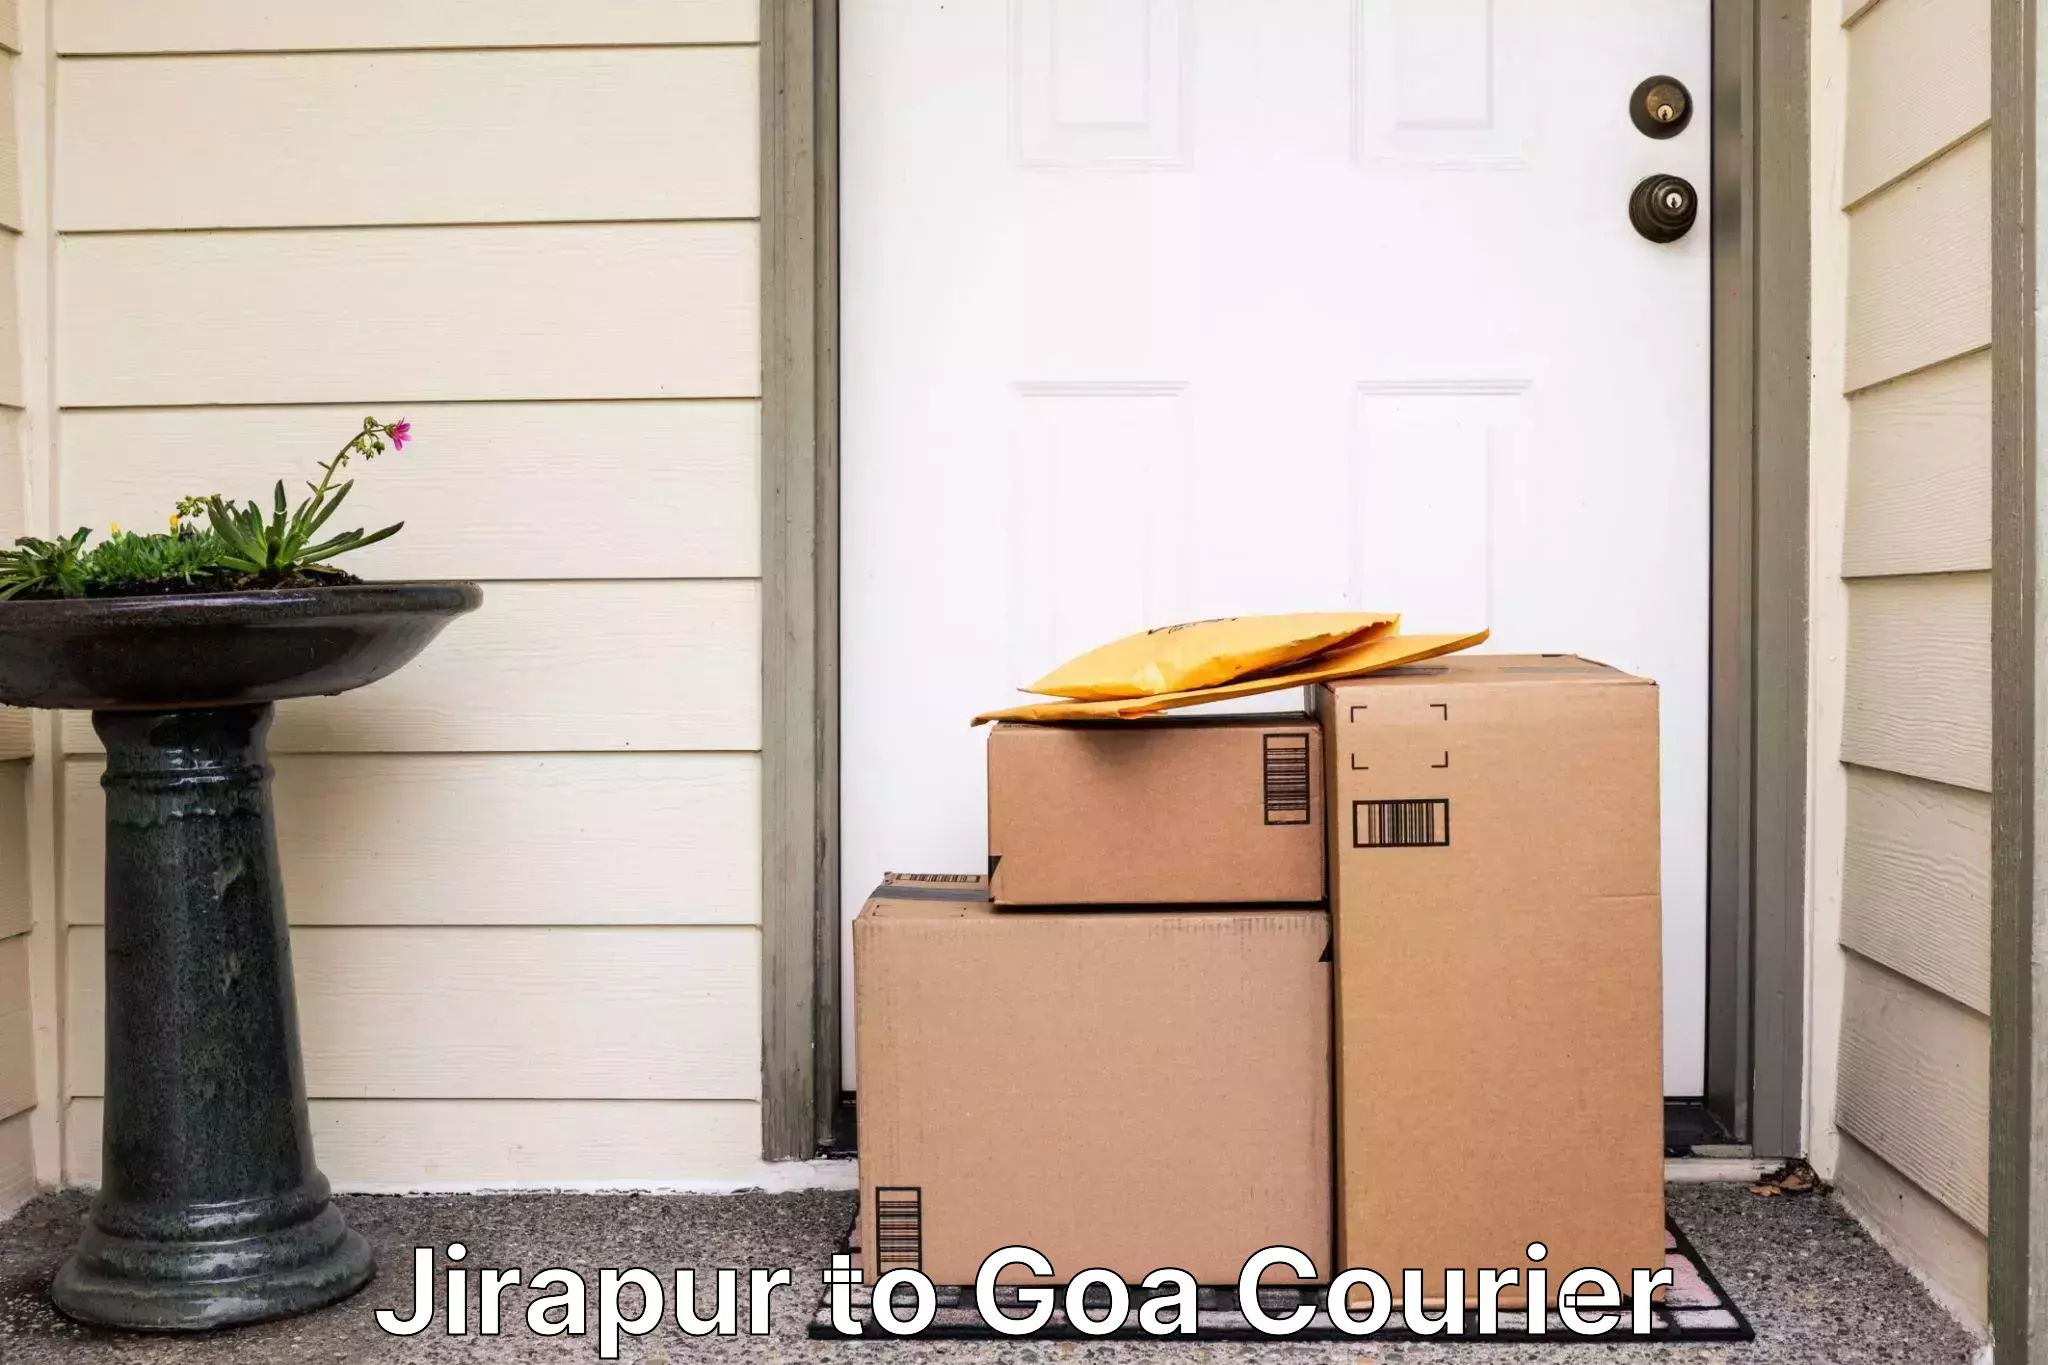 Flexible delivery schedules Jirapur to Goa